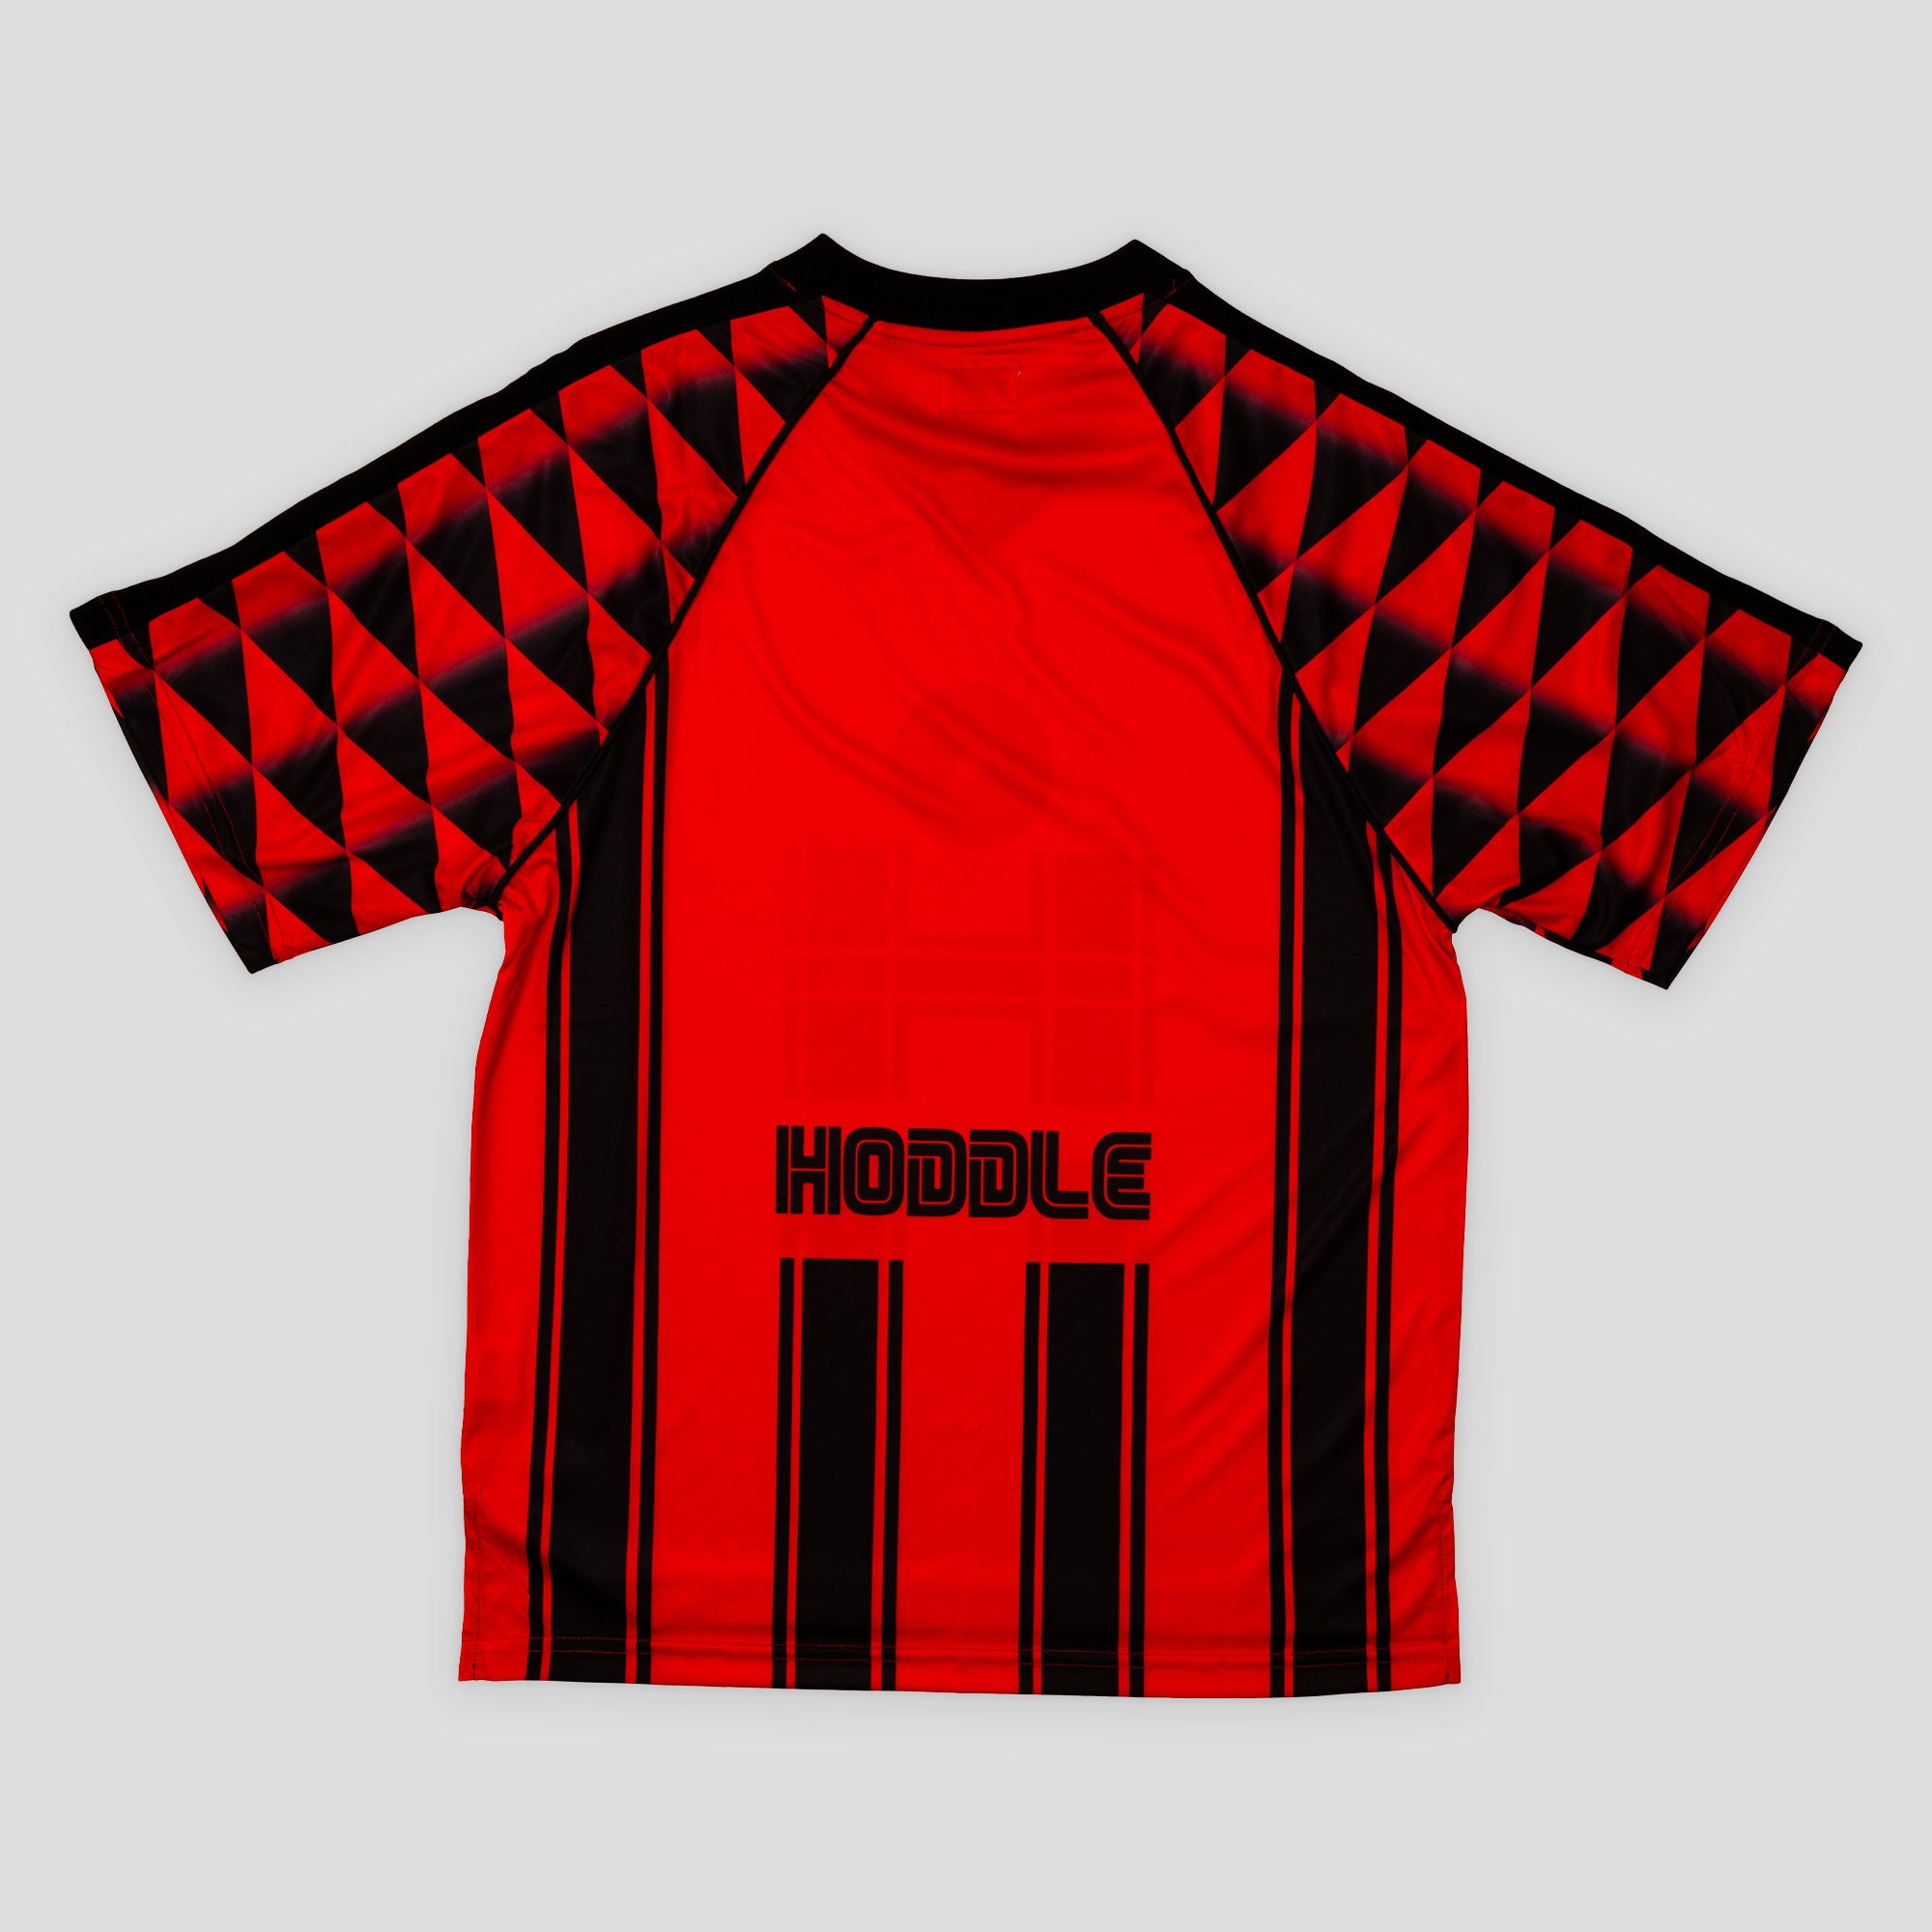 Hoddle Football Jersey - Red